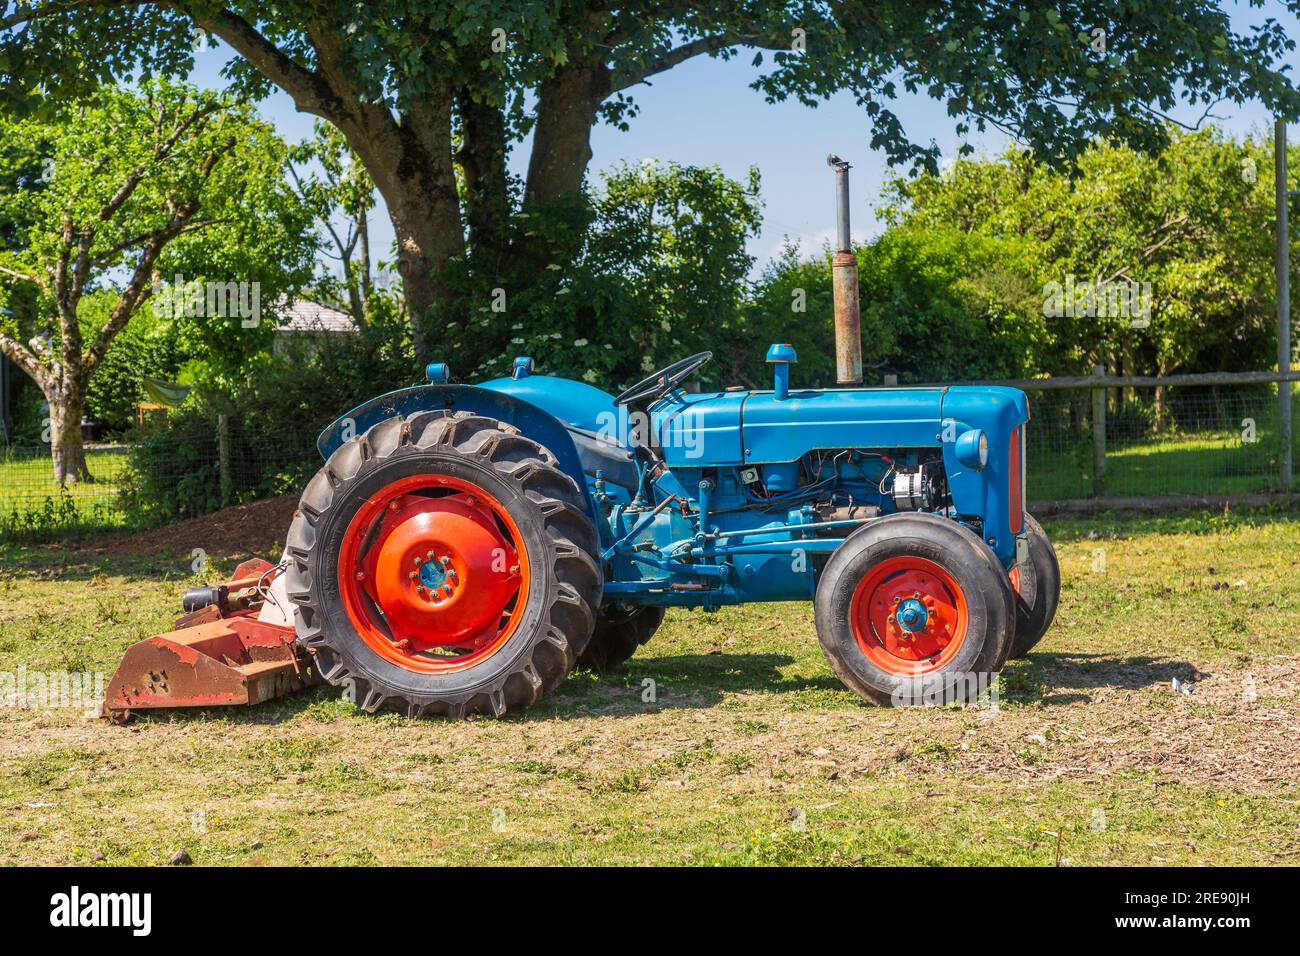 Vintage Fordson tractor in a rural setting, Glamorgan. Stock Photo